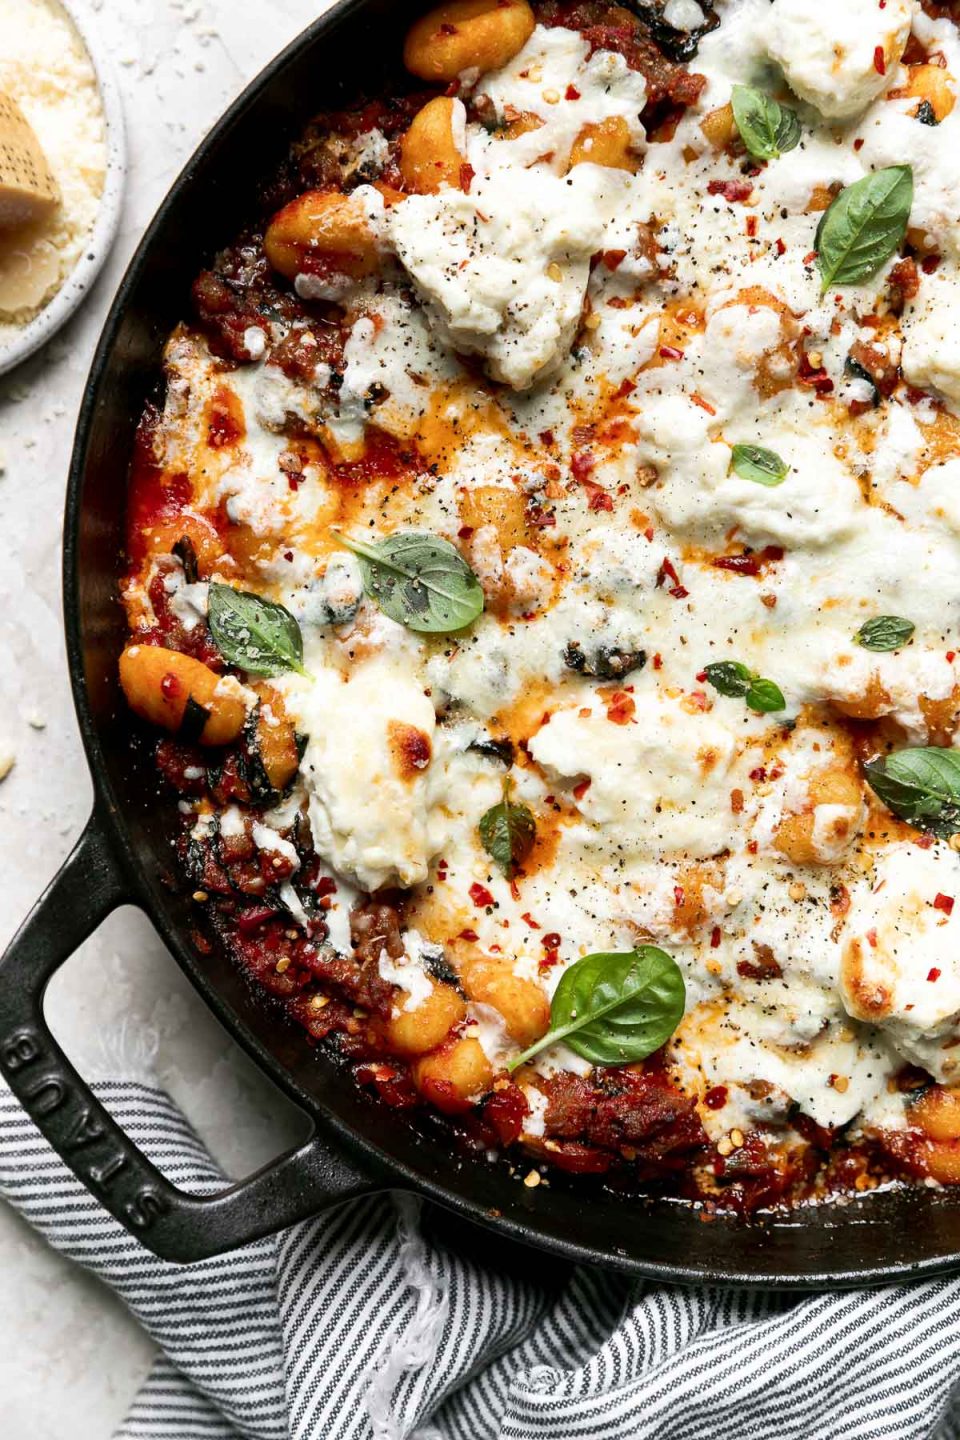 Overhead shot of baked gnocchi in a large oven-safe skillet, atop a creamy white surface. The pasta bake is garnished with fresh basil & ground black pepper. A blue & white striped linen napkin and a rind of freshly grated Parmigiano Reggiano cheese rests on the surface alongside the skillet.